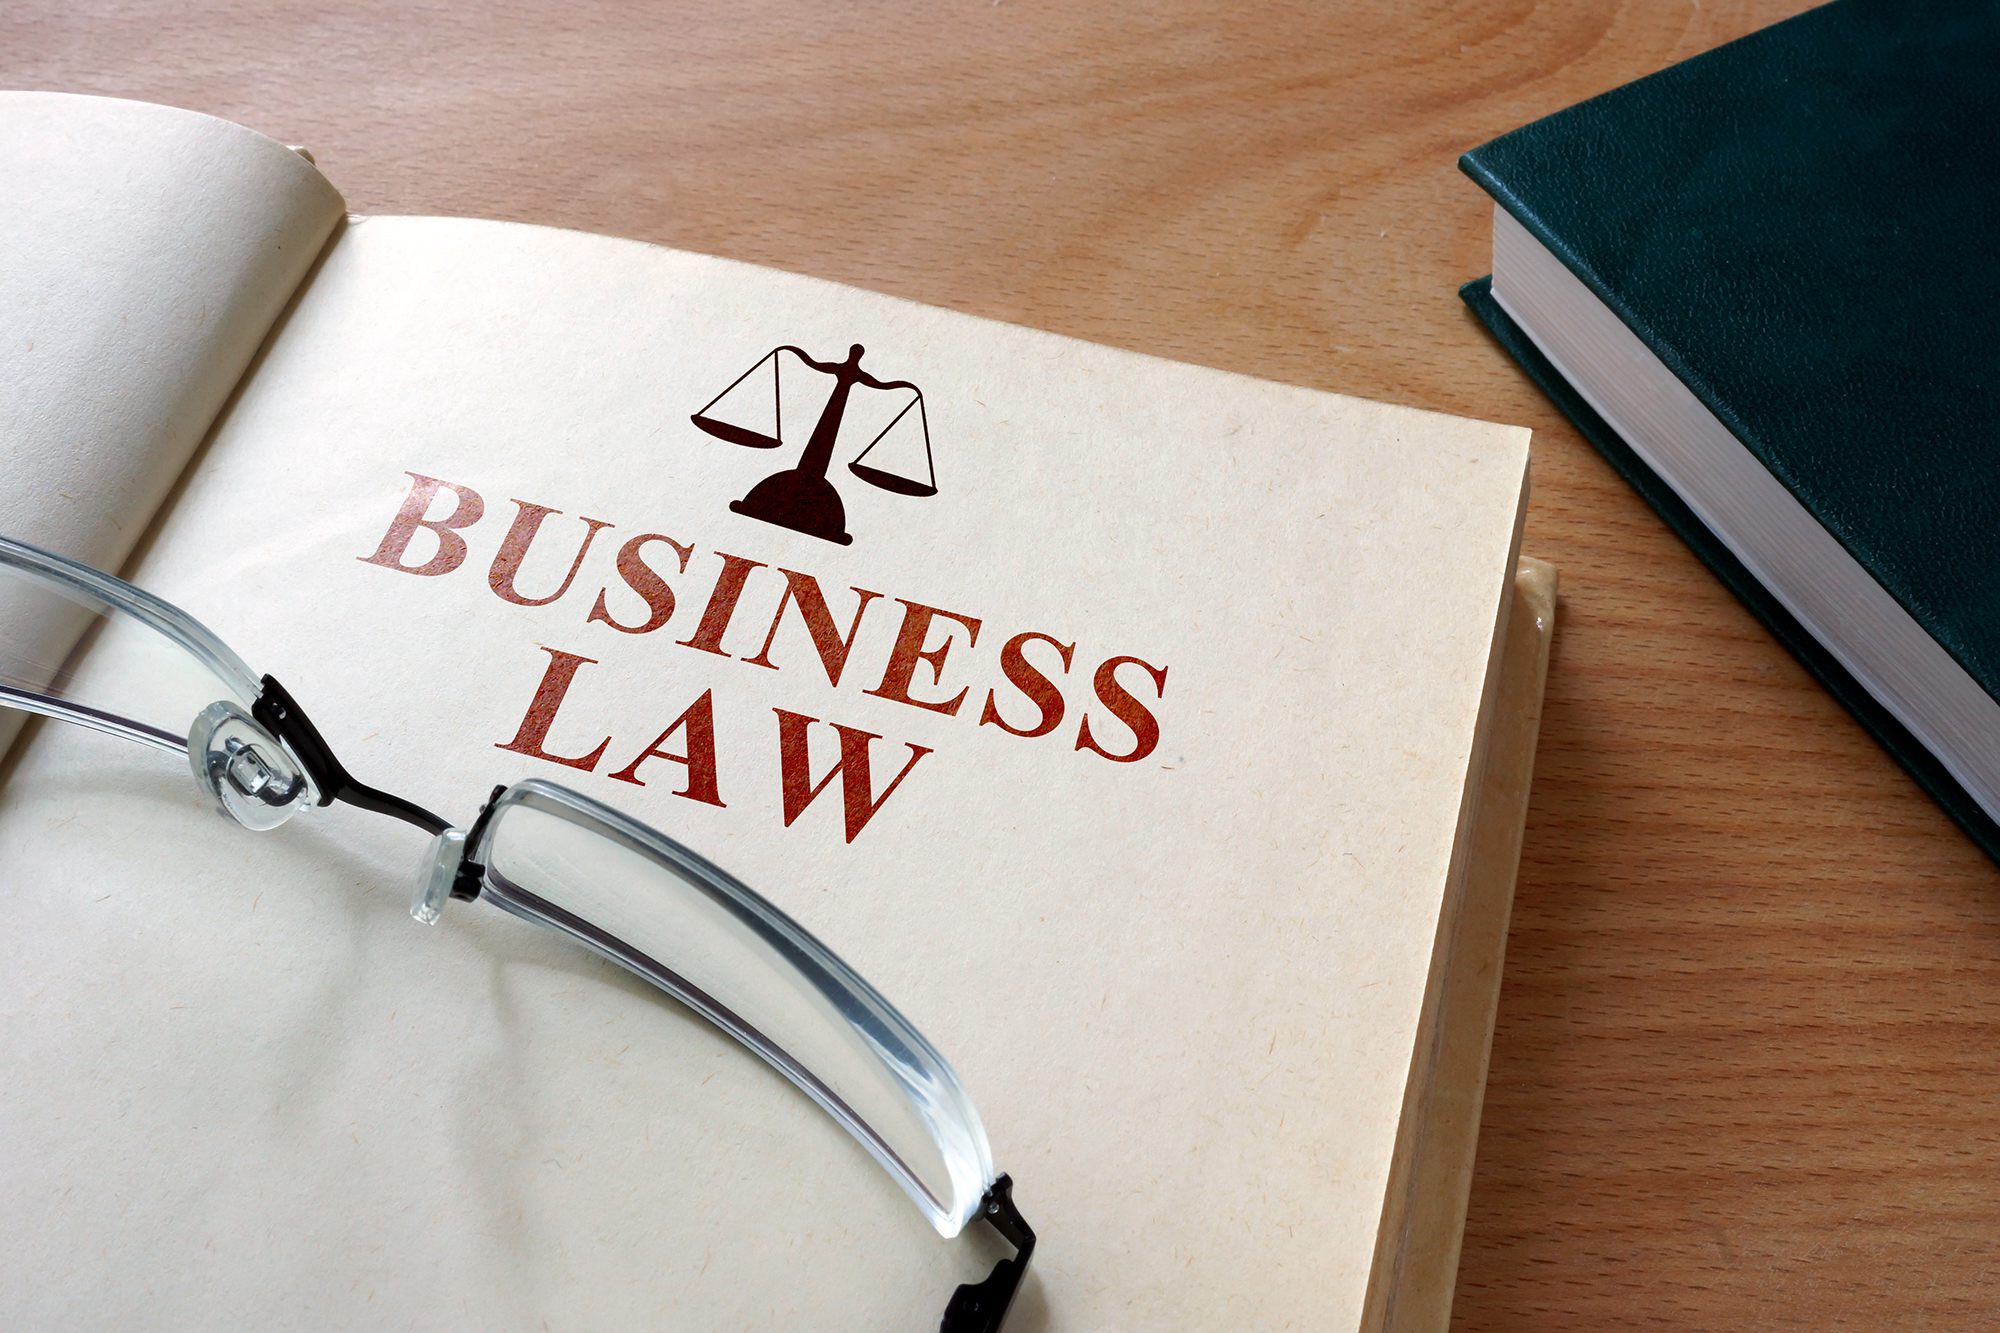 understanding-business-law-is-important-for-running-a-successful-businesses